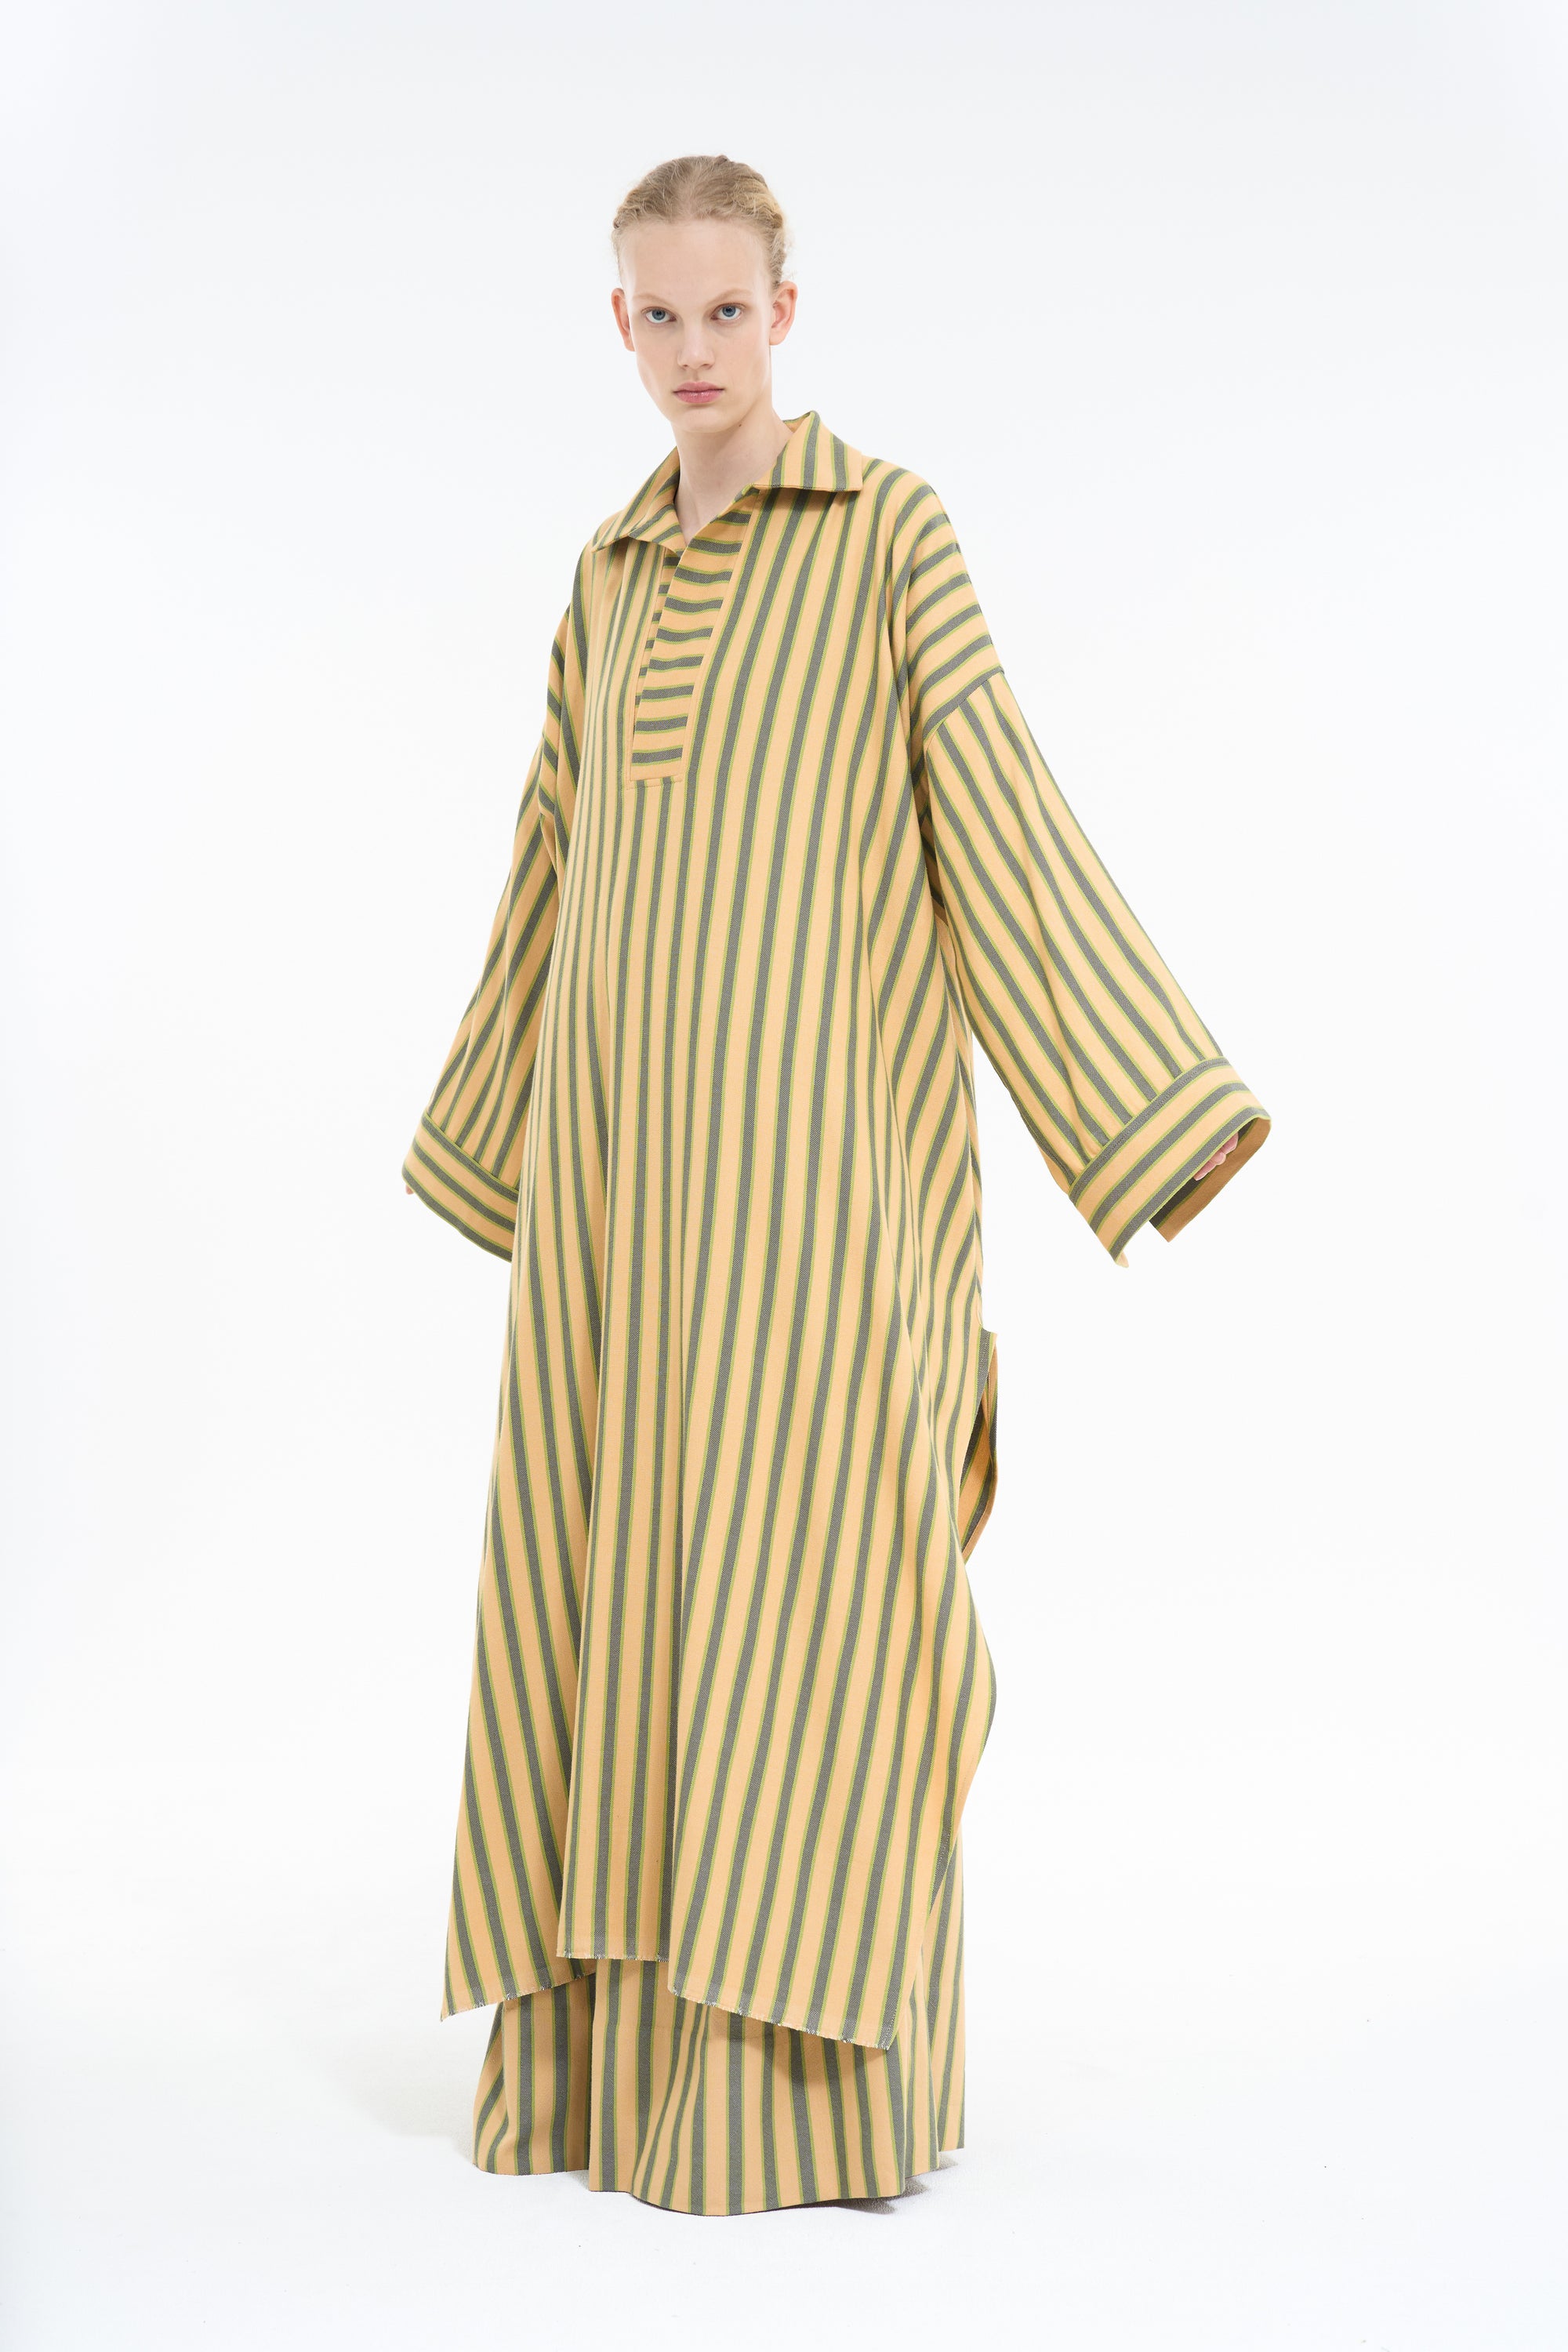 RUGBY TUNIC - STRIPE 5